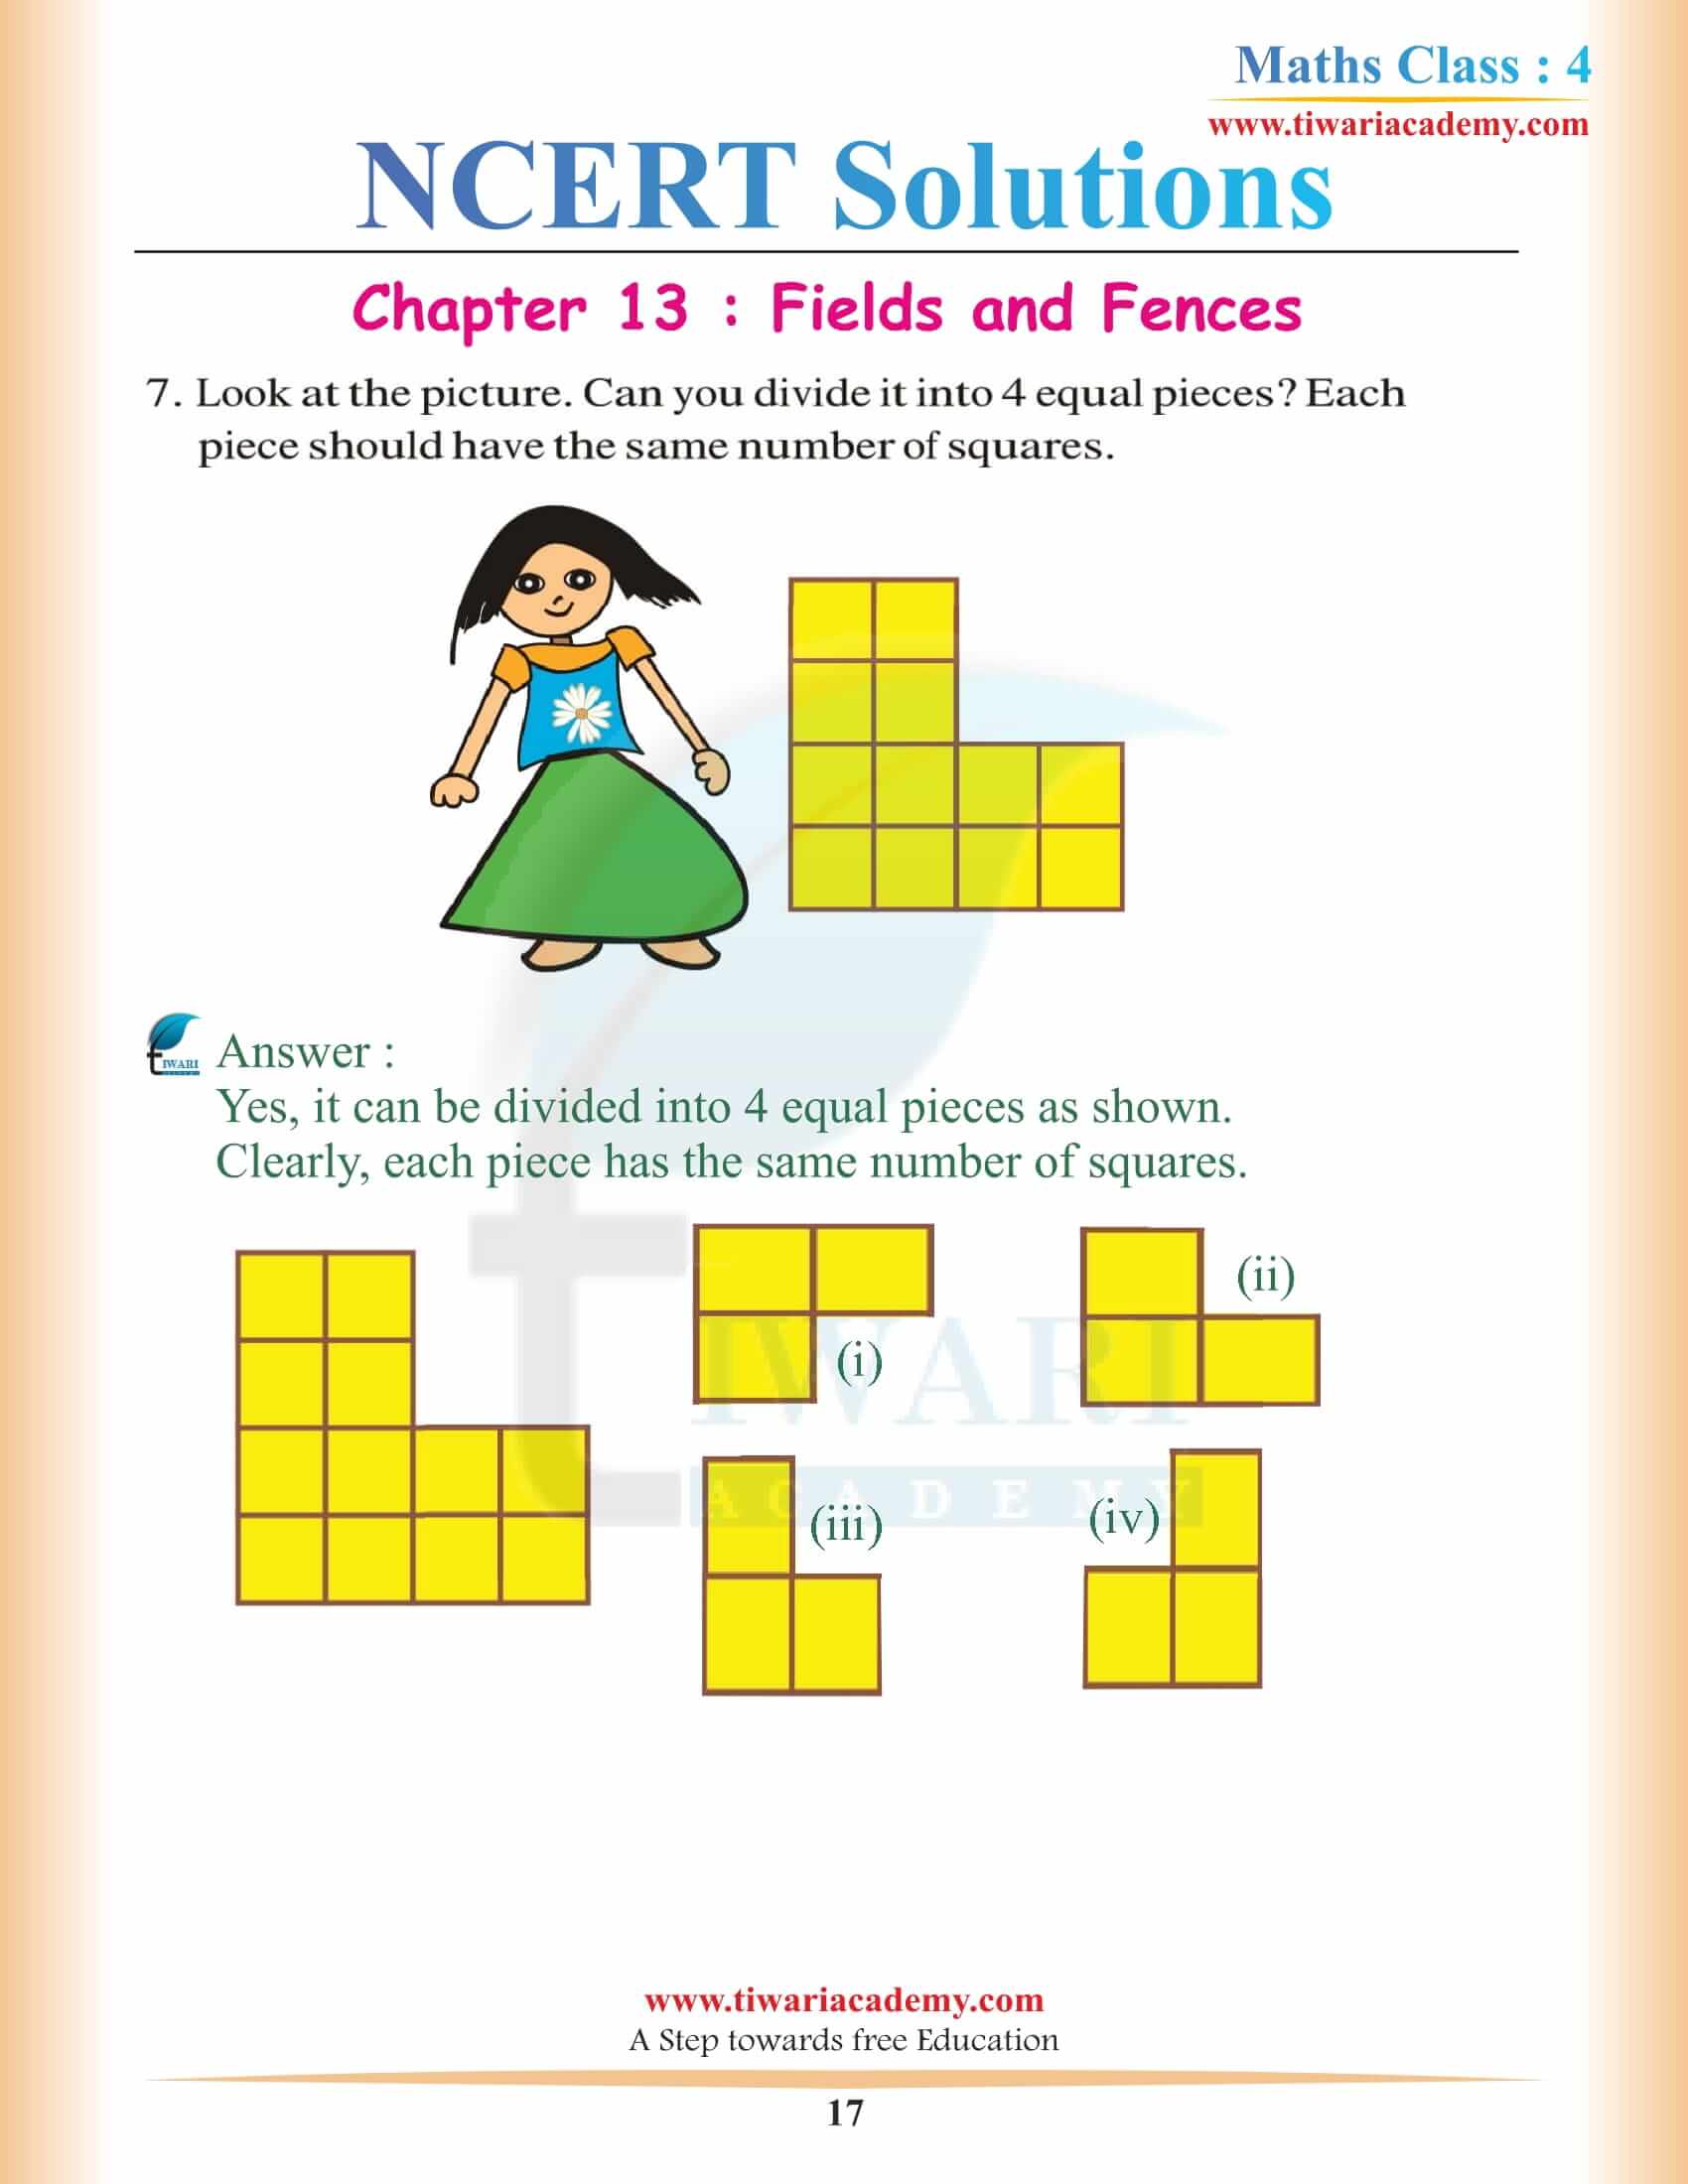 Class 4 Maths NCERT Chapter 13 sols in English